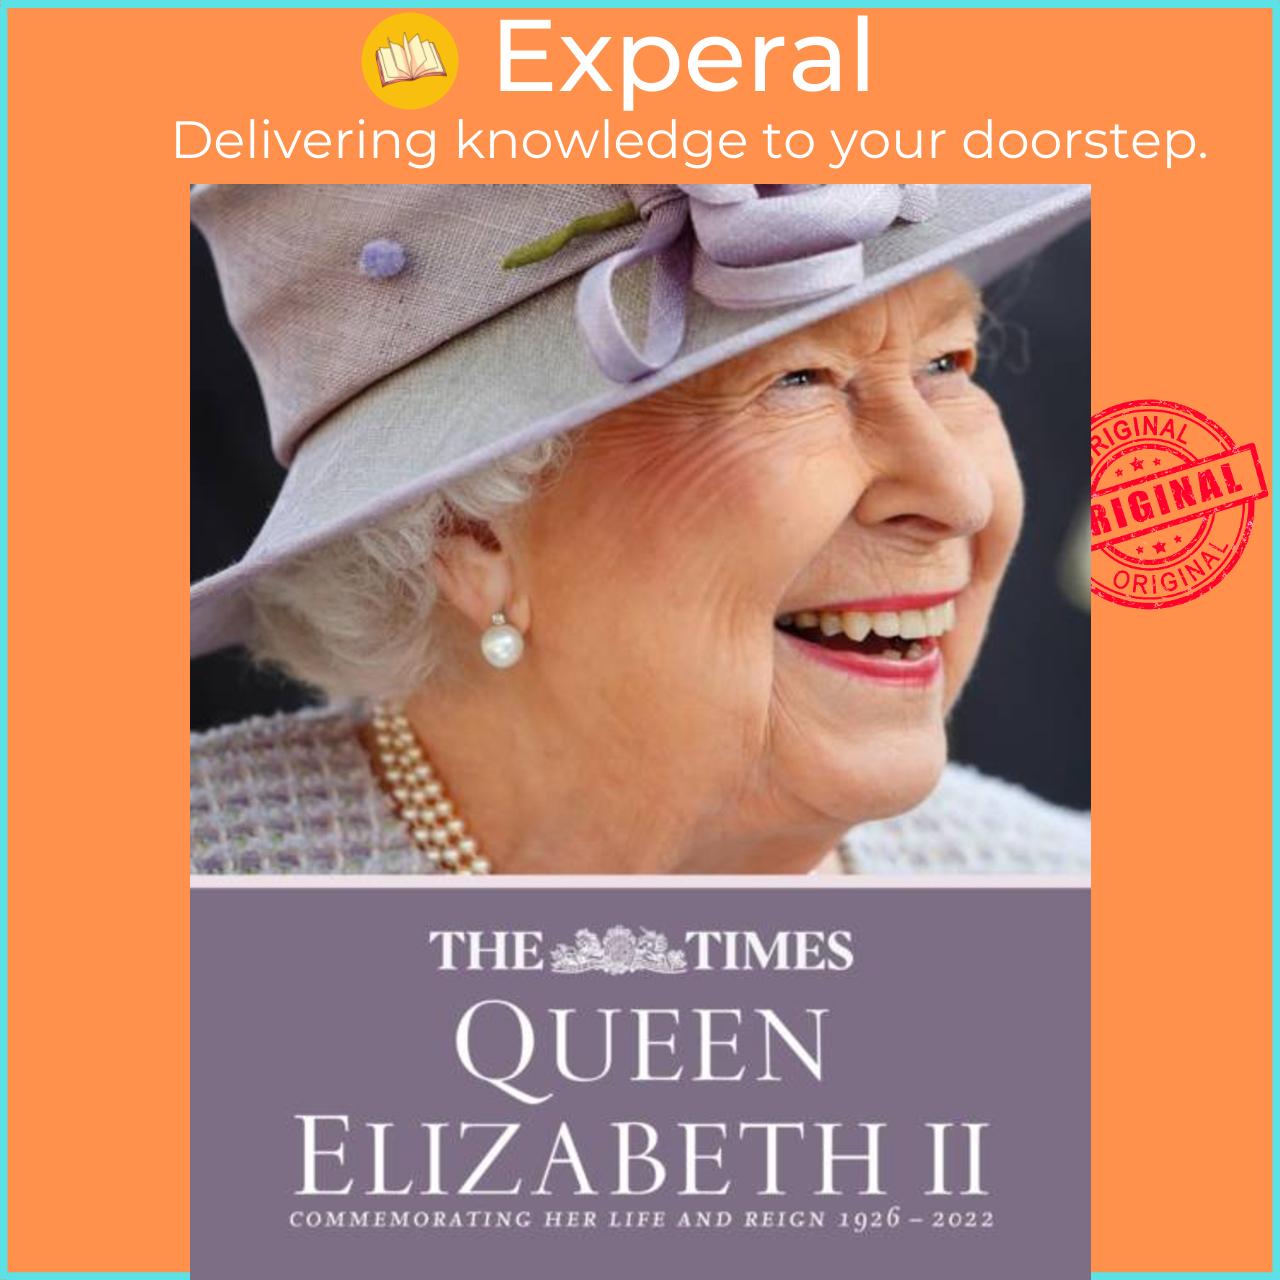 Sách - The Times Queen Elizabeth II - Commemorating Her Life and Reign 1926 - 202 by Times Books (UK edition, hardcover)